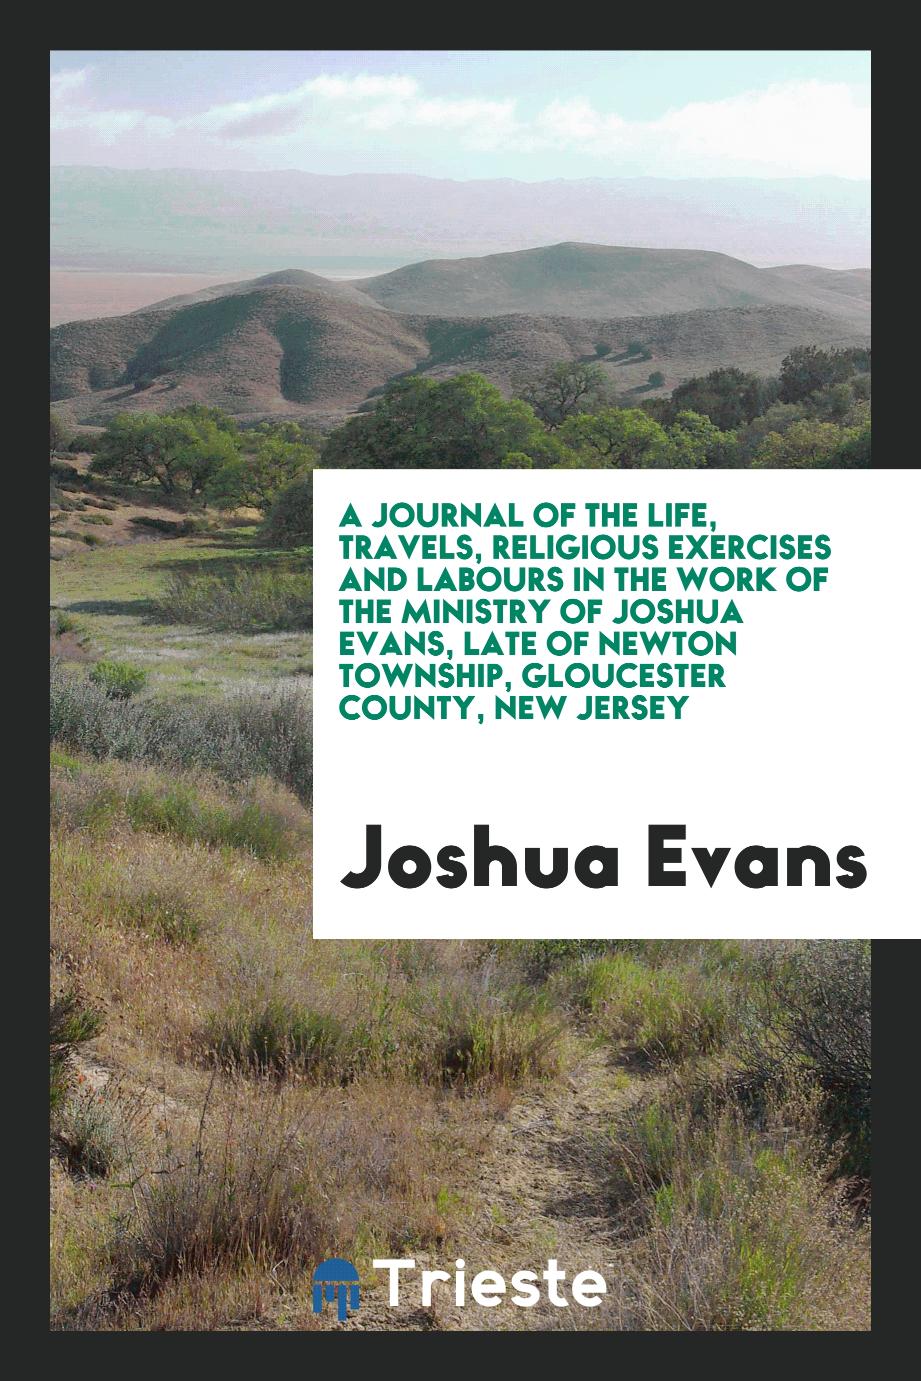 A journal of the life, travels, religious exercises and labours in the work of the ministry of Joshua Evans, late of Newton Township, Gloucester County, New Jersey